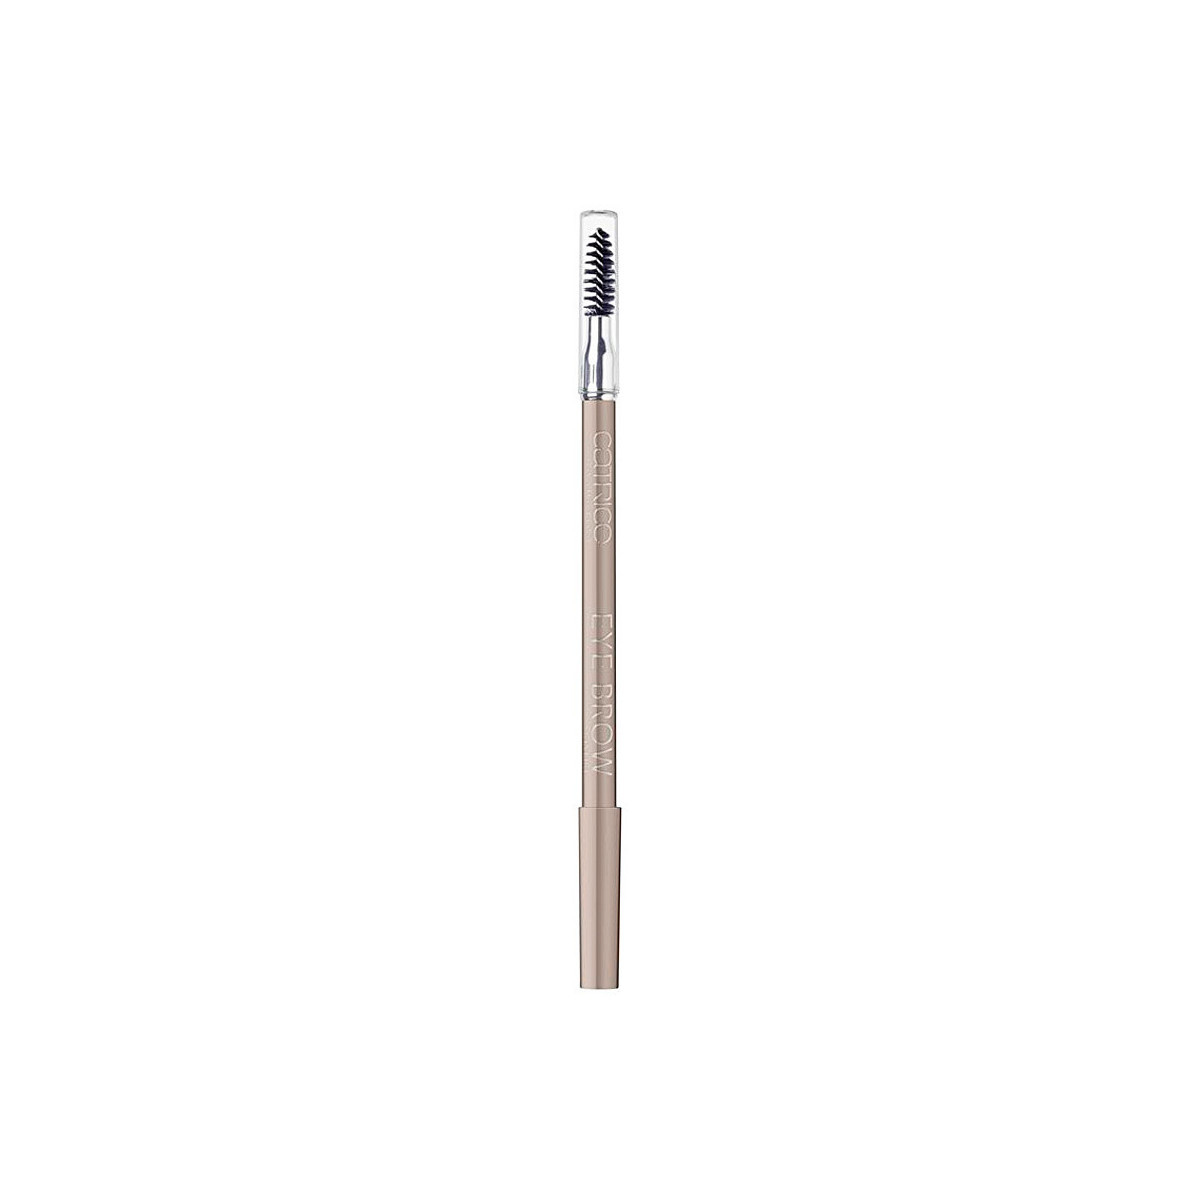 Beauté Femme Maquillage Sourcils Catrice Eye Brow Stylist 020-date With Ash-ton 